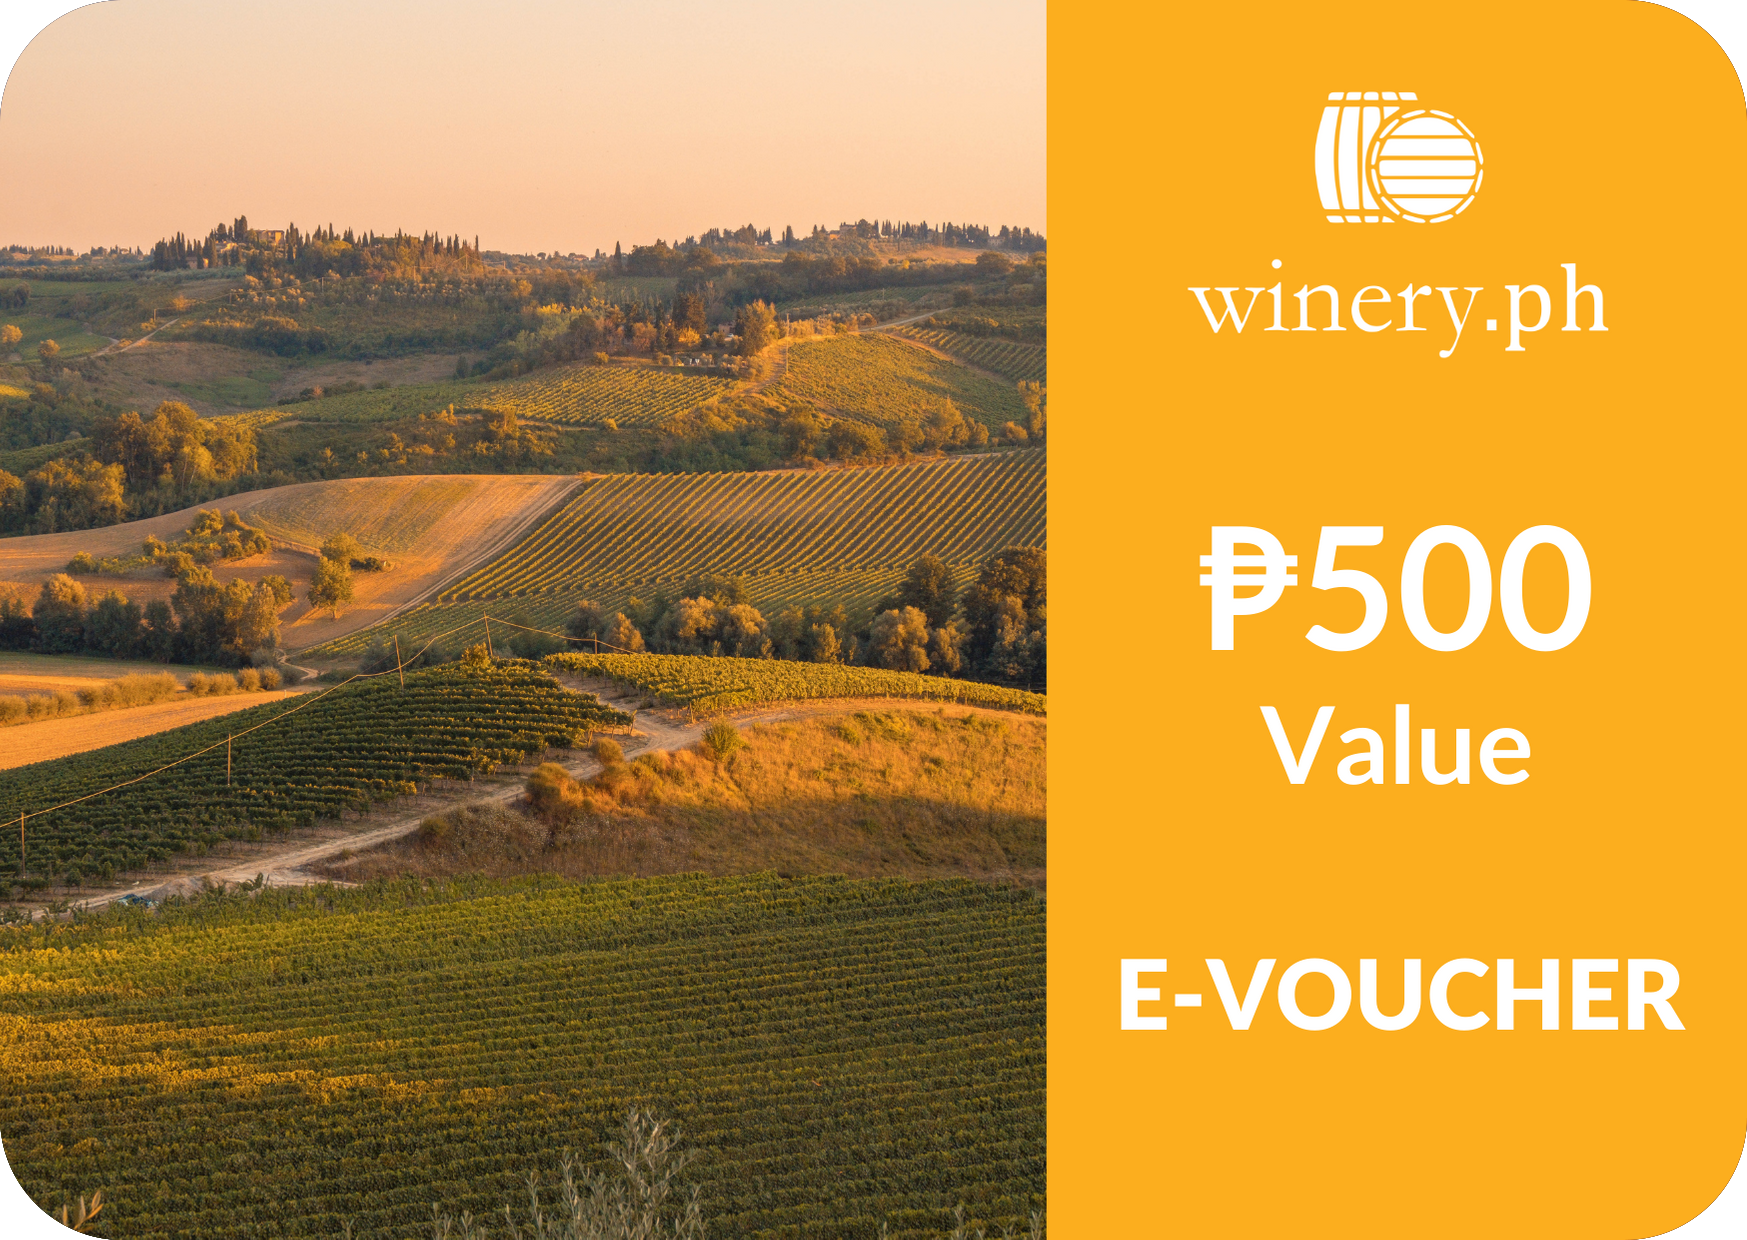 Five Hundred Peso (Php 500) Winery.ph e-Voucher